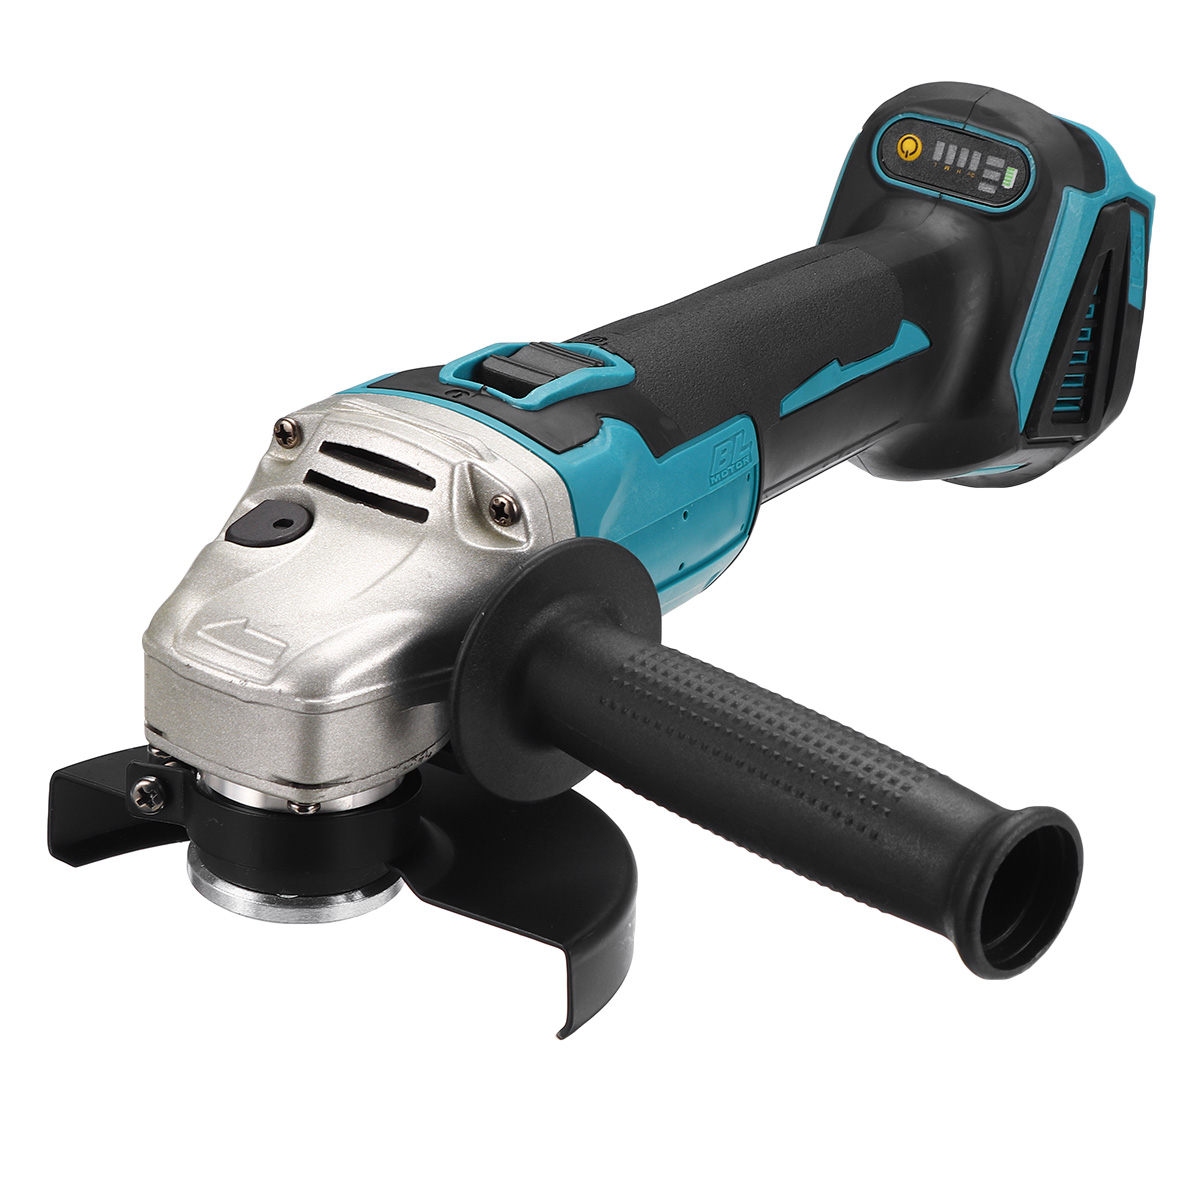 Drillpro-125mm-4-Speed-Regulated-Angle-Grinder-Rechargable-Li-ion-Battery-Brushless-Electric-Grinder-1699793-5